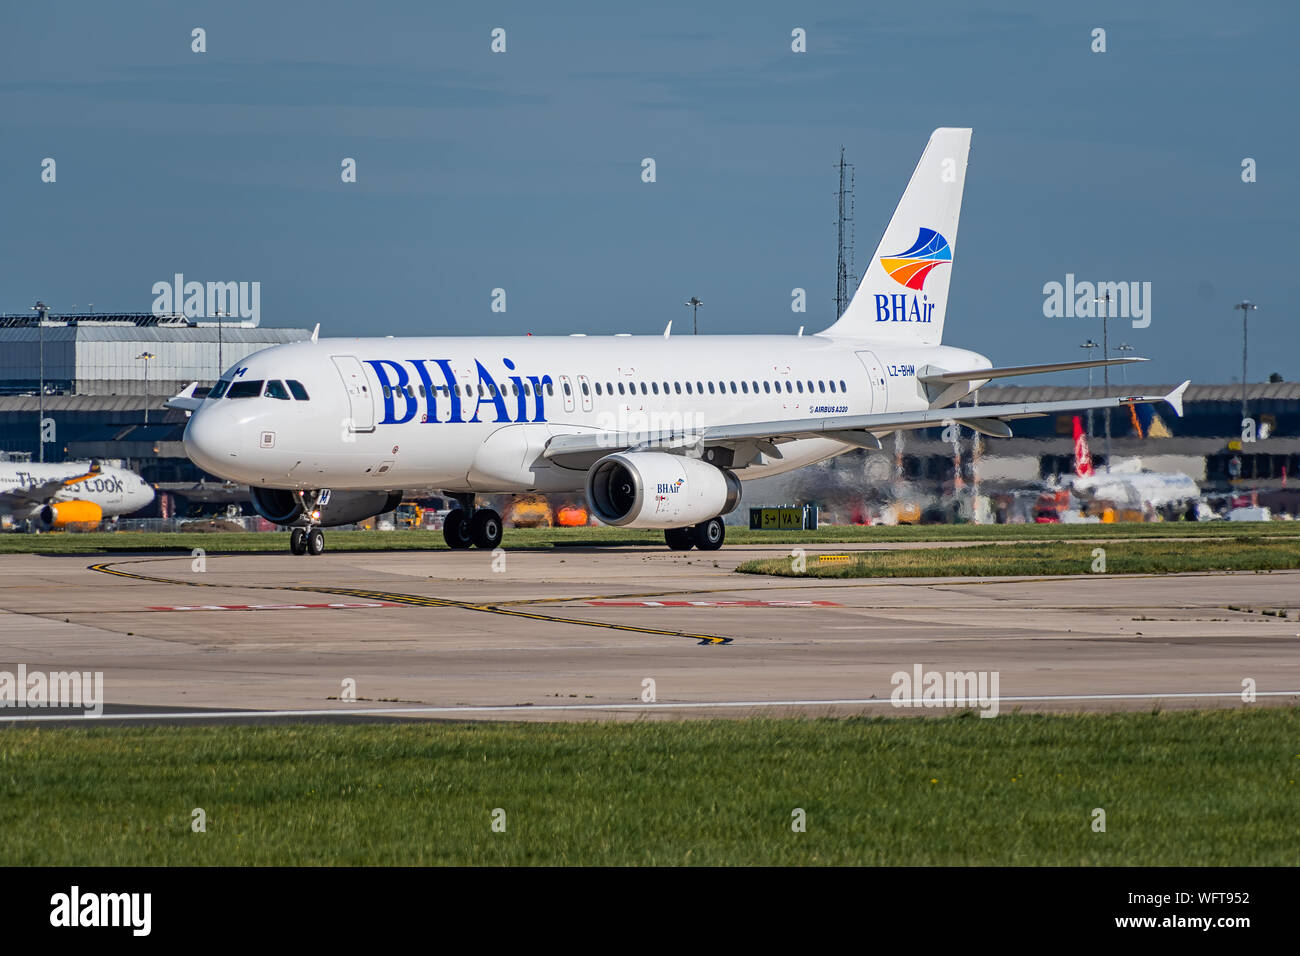 MANCHESTER, UNITED KINGDOM - AUGUST 24, 2019: BH Air Airbus A320 taxiing for departure Stock Photo